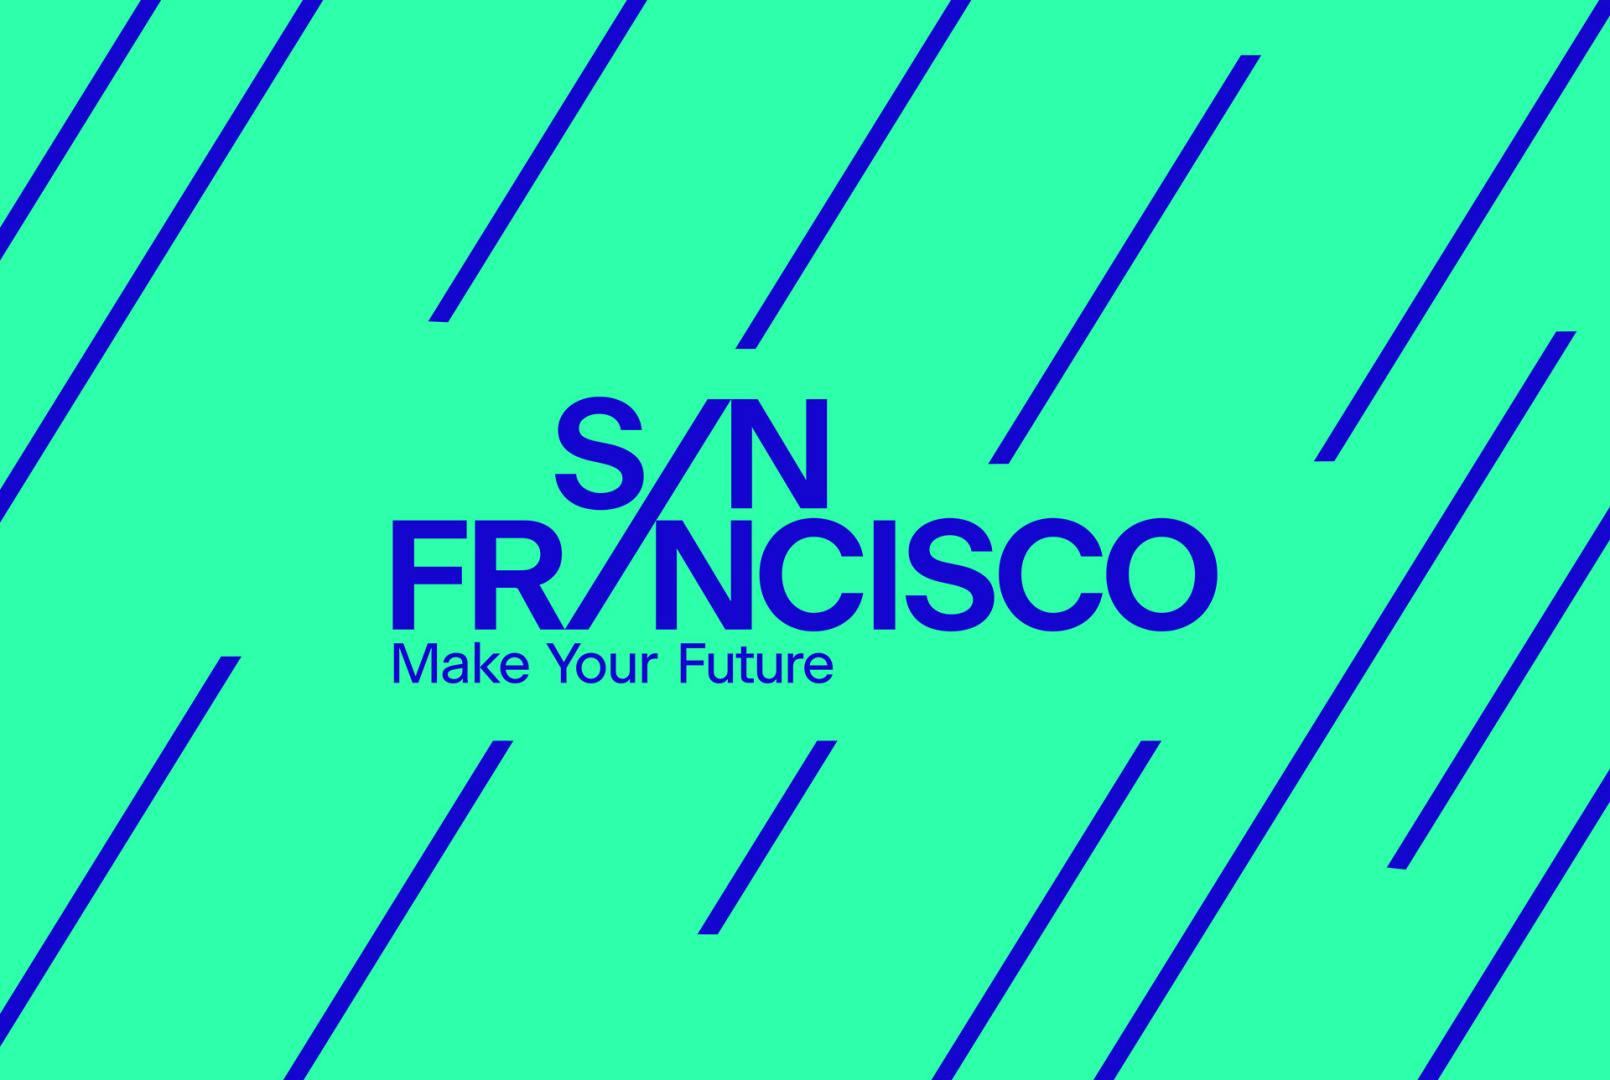 Image of San Francisco place branding, with the logotype in blue laid over a mint green background with diagonal linear pattern